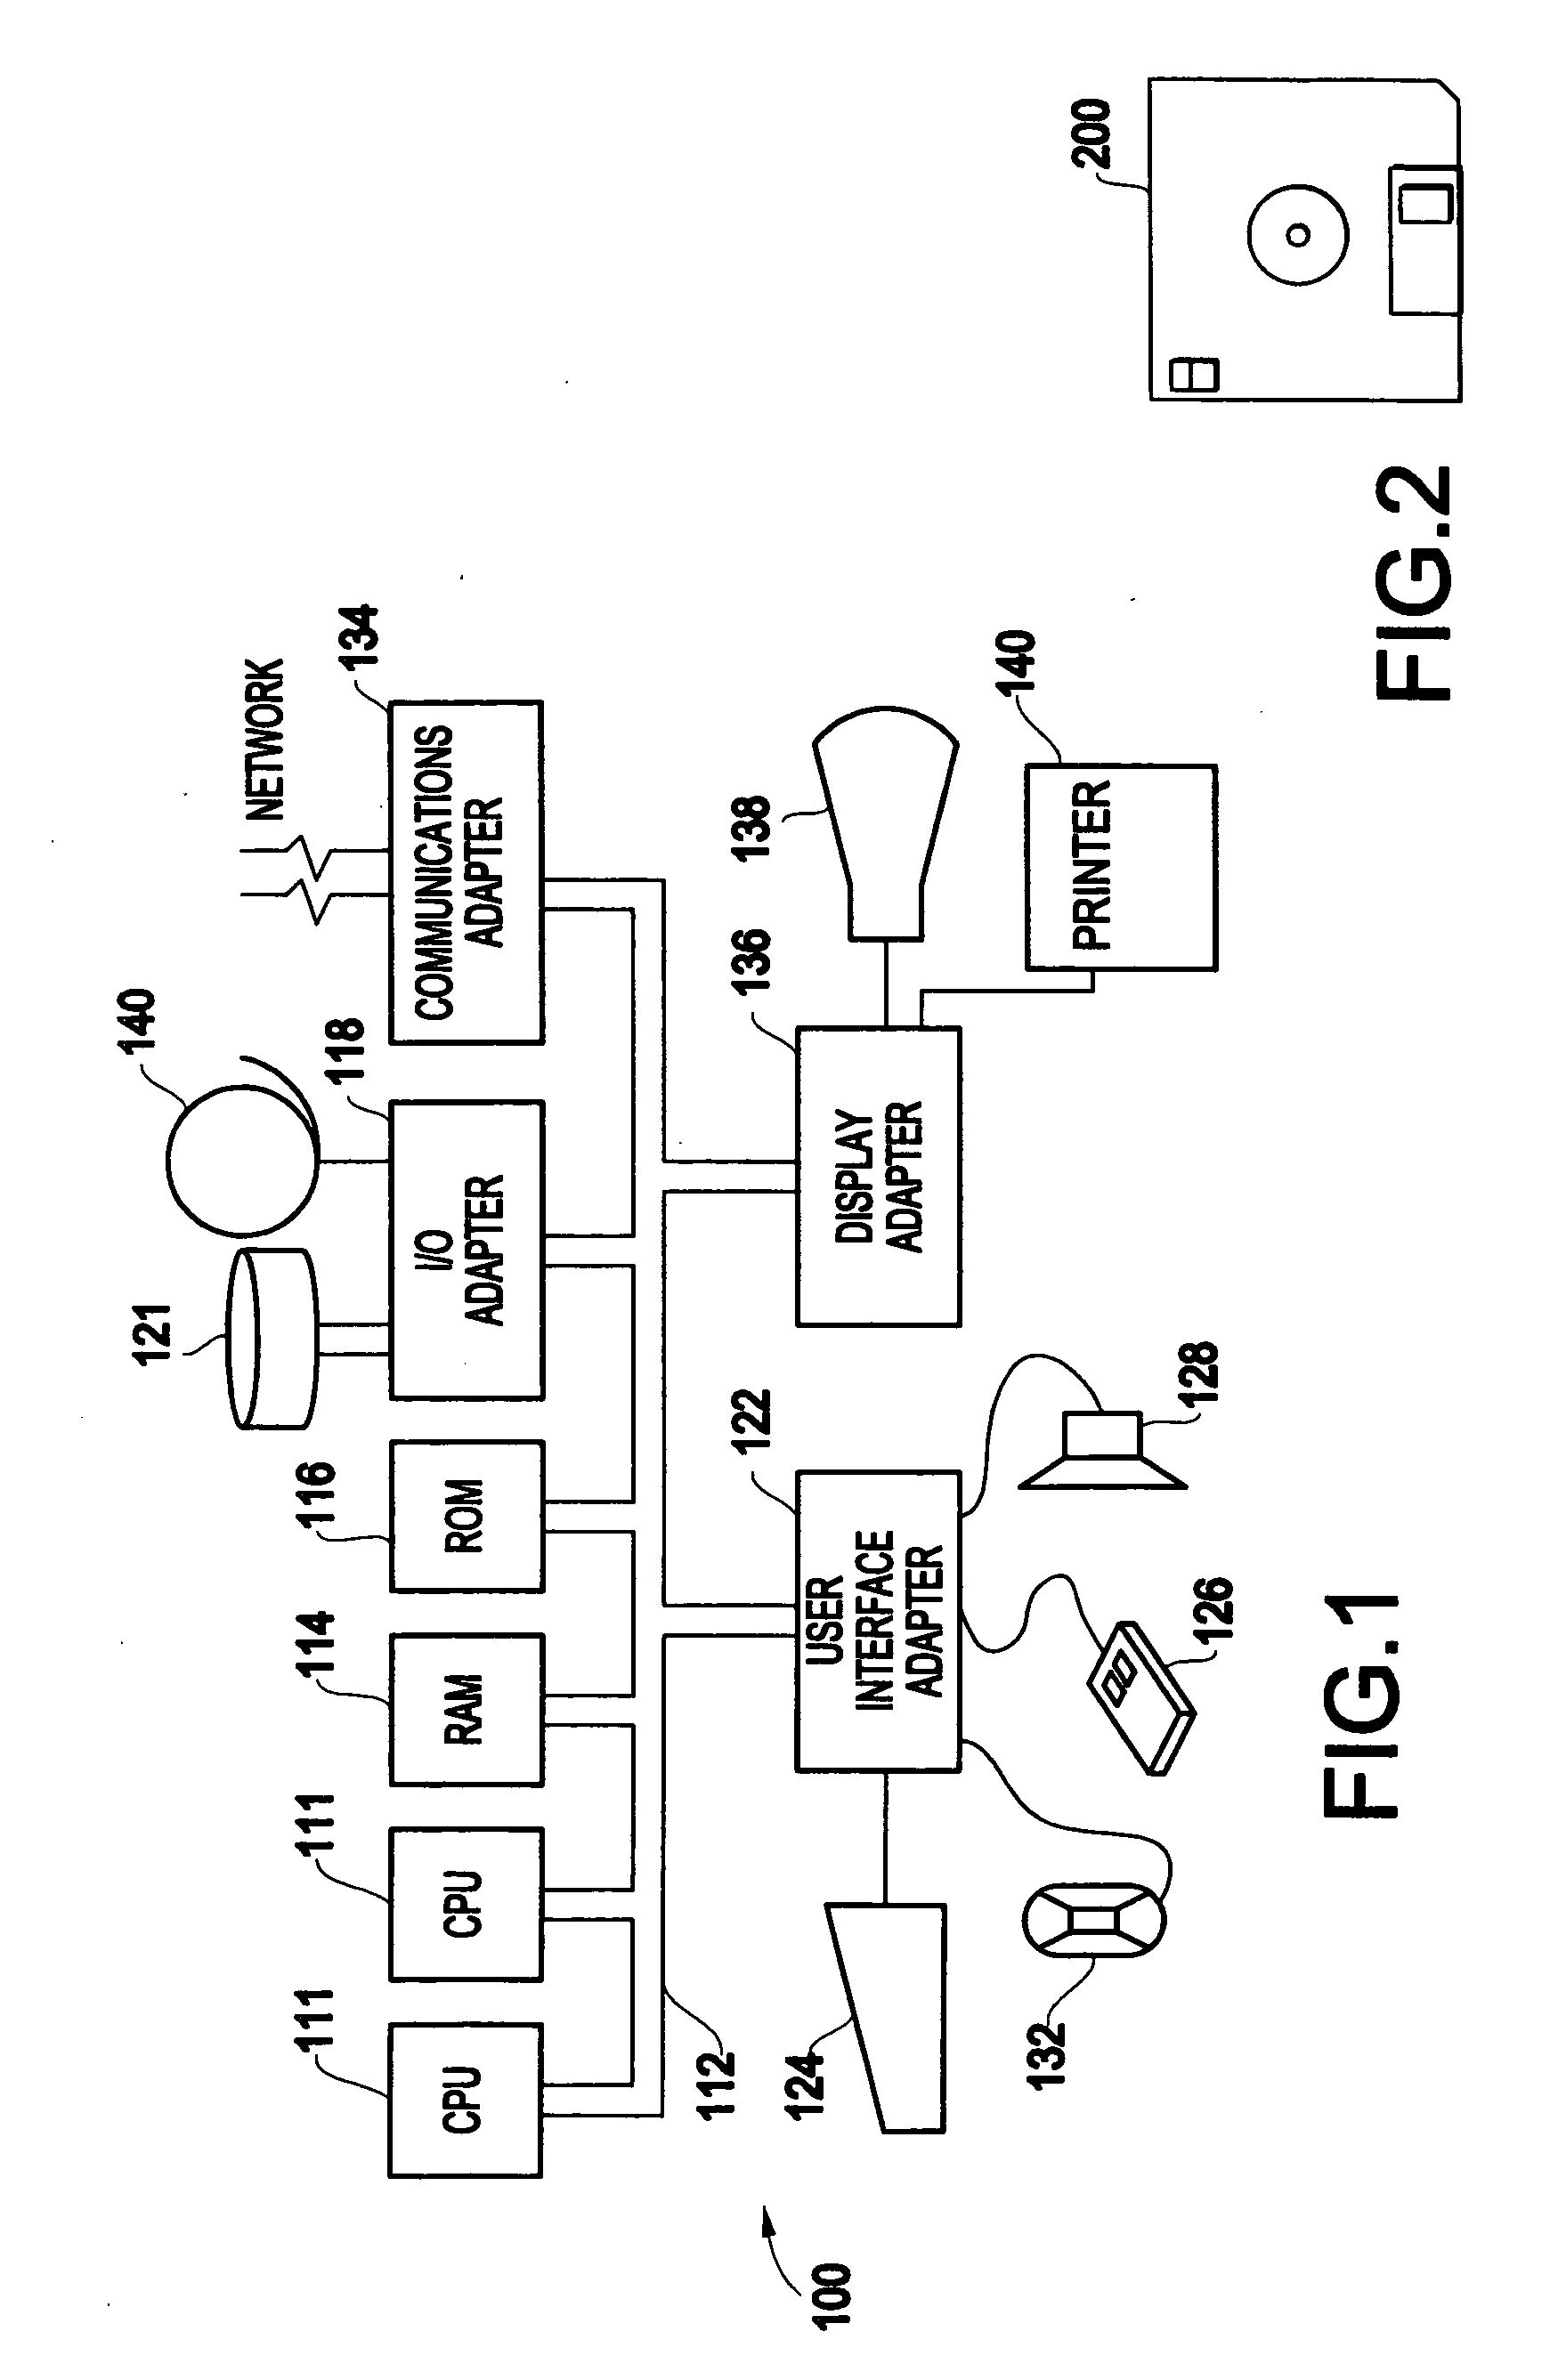 Method, system and recording medium for maintaining the order of nodes in a heirarchical document